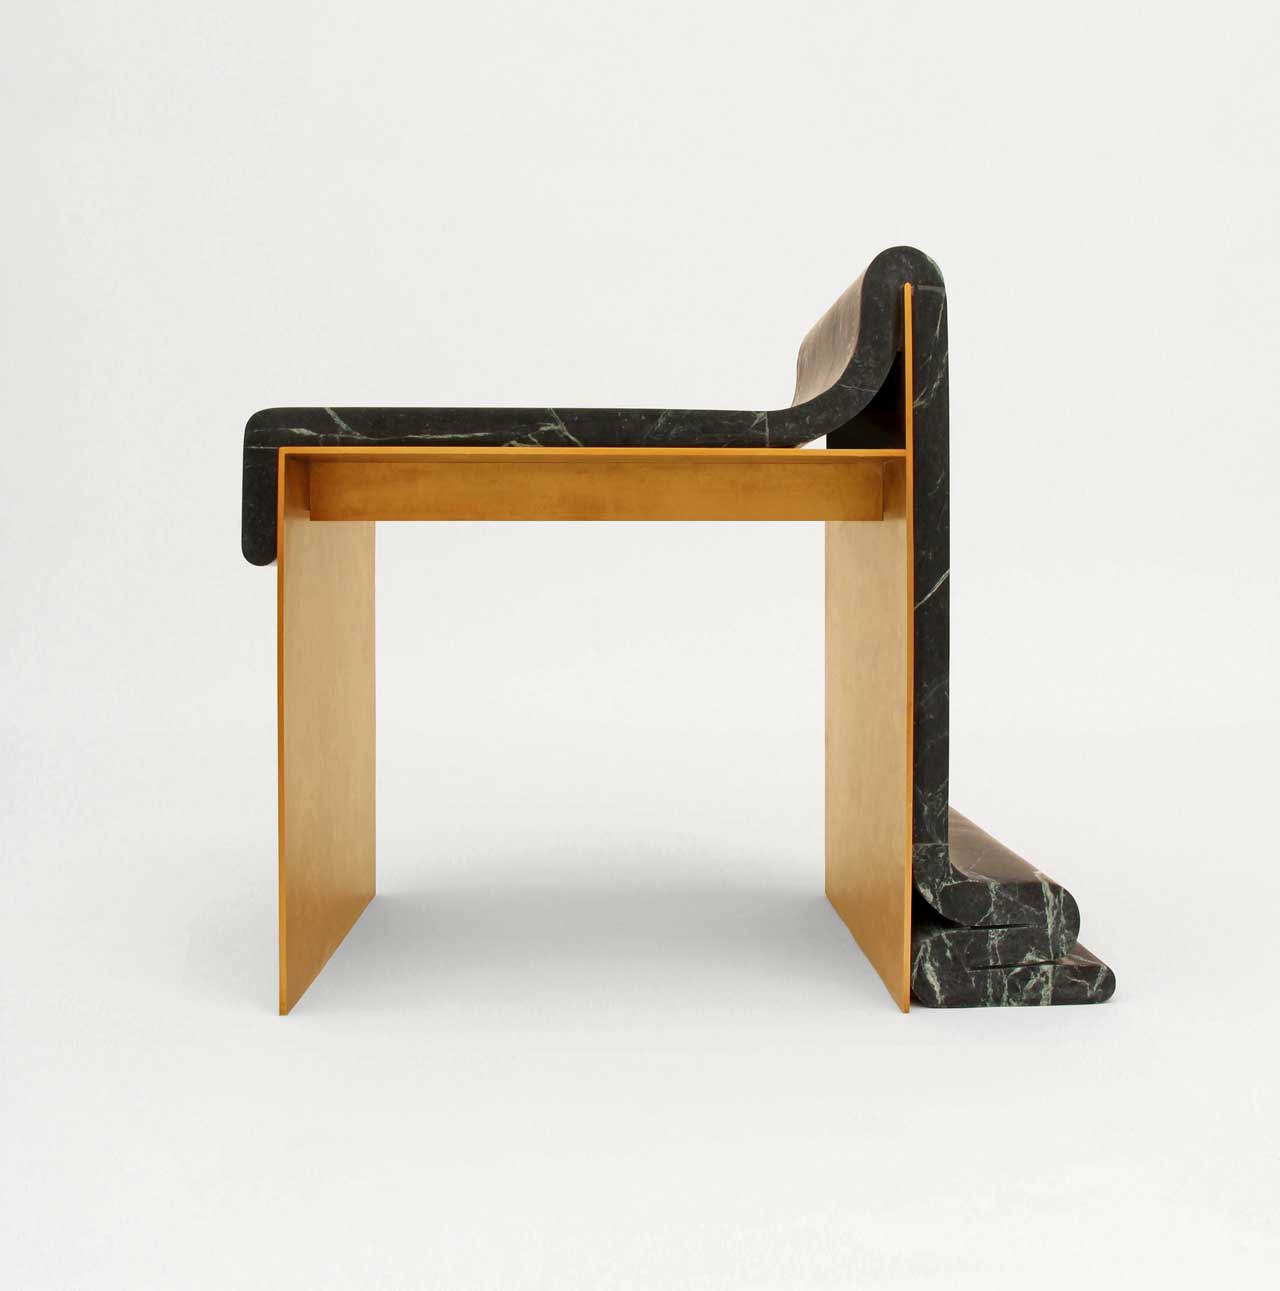 A Marble and Brass Chair That Looks as If It's Melting